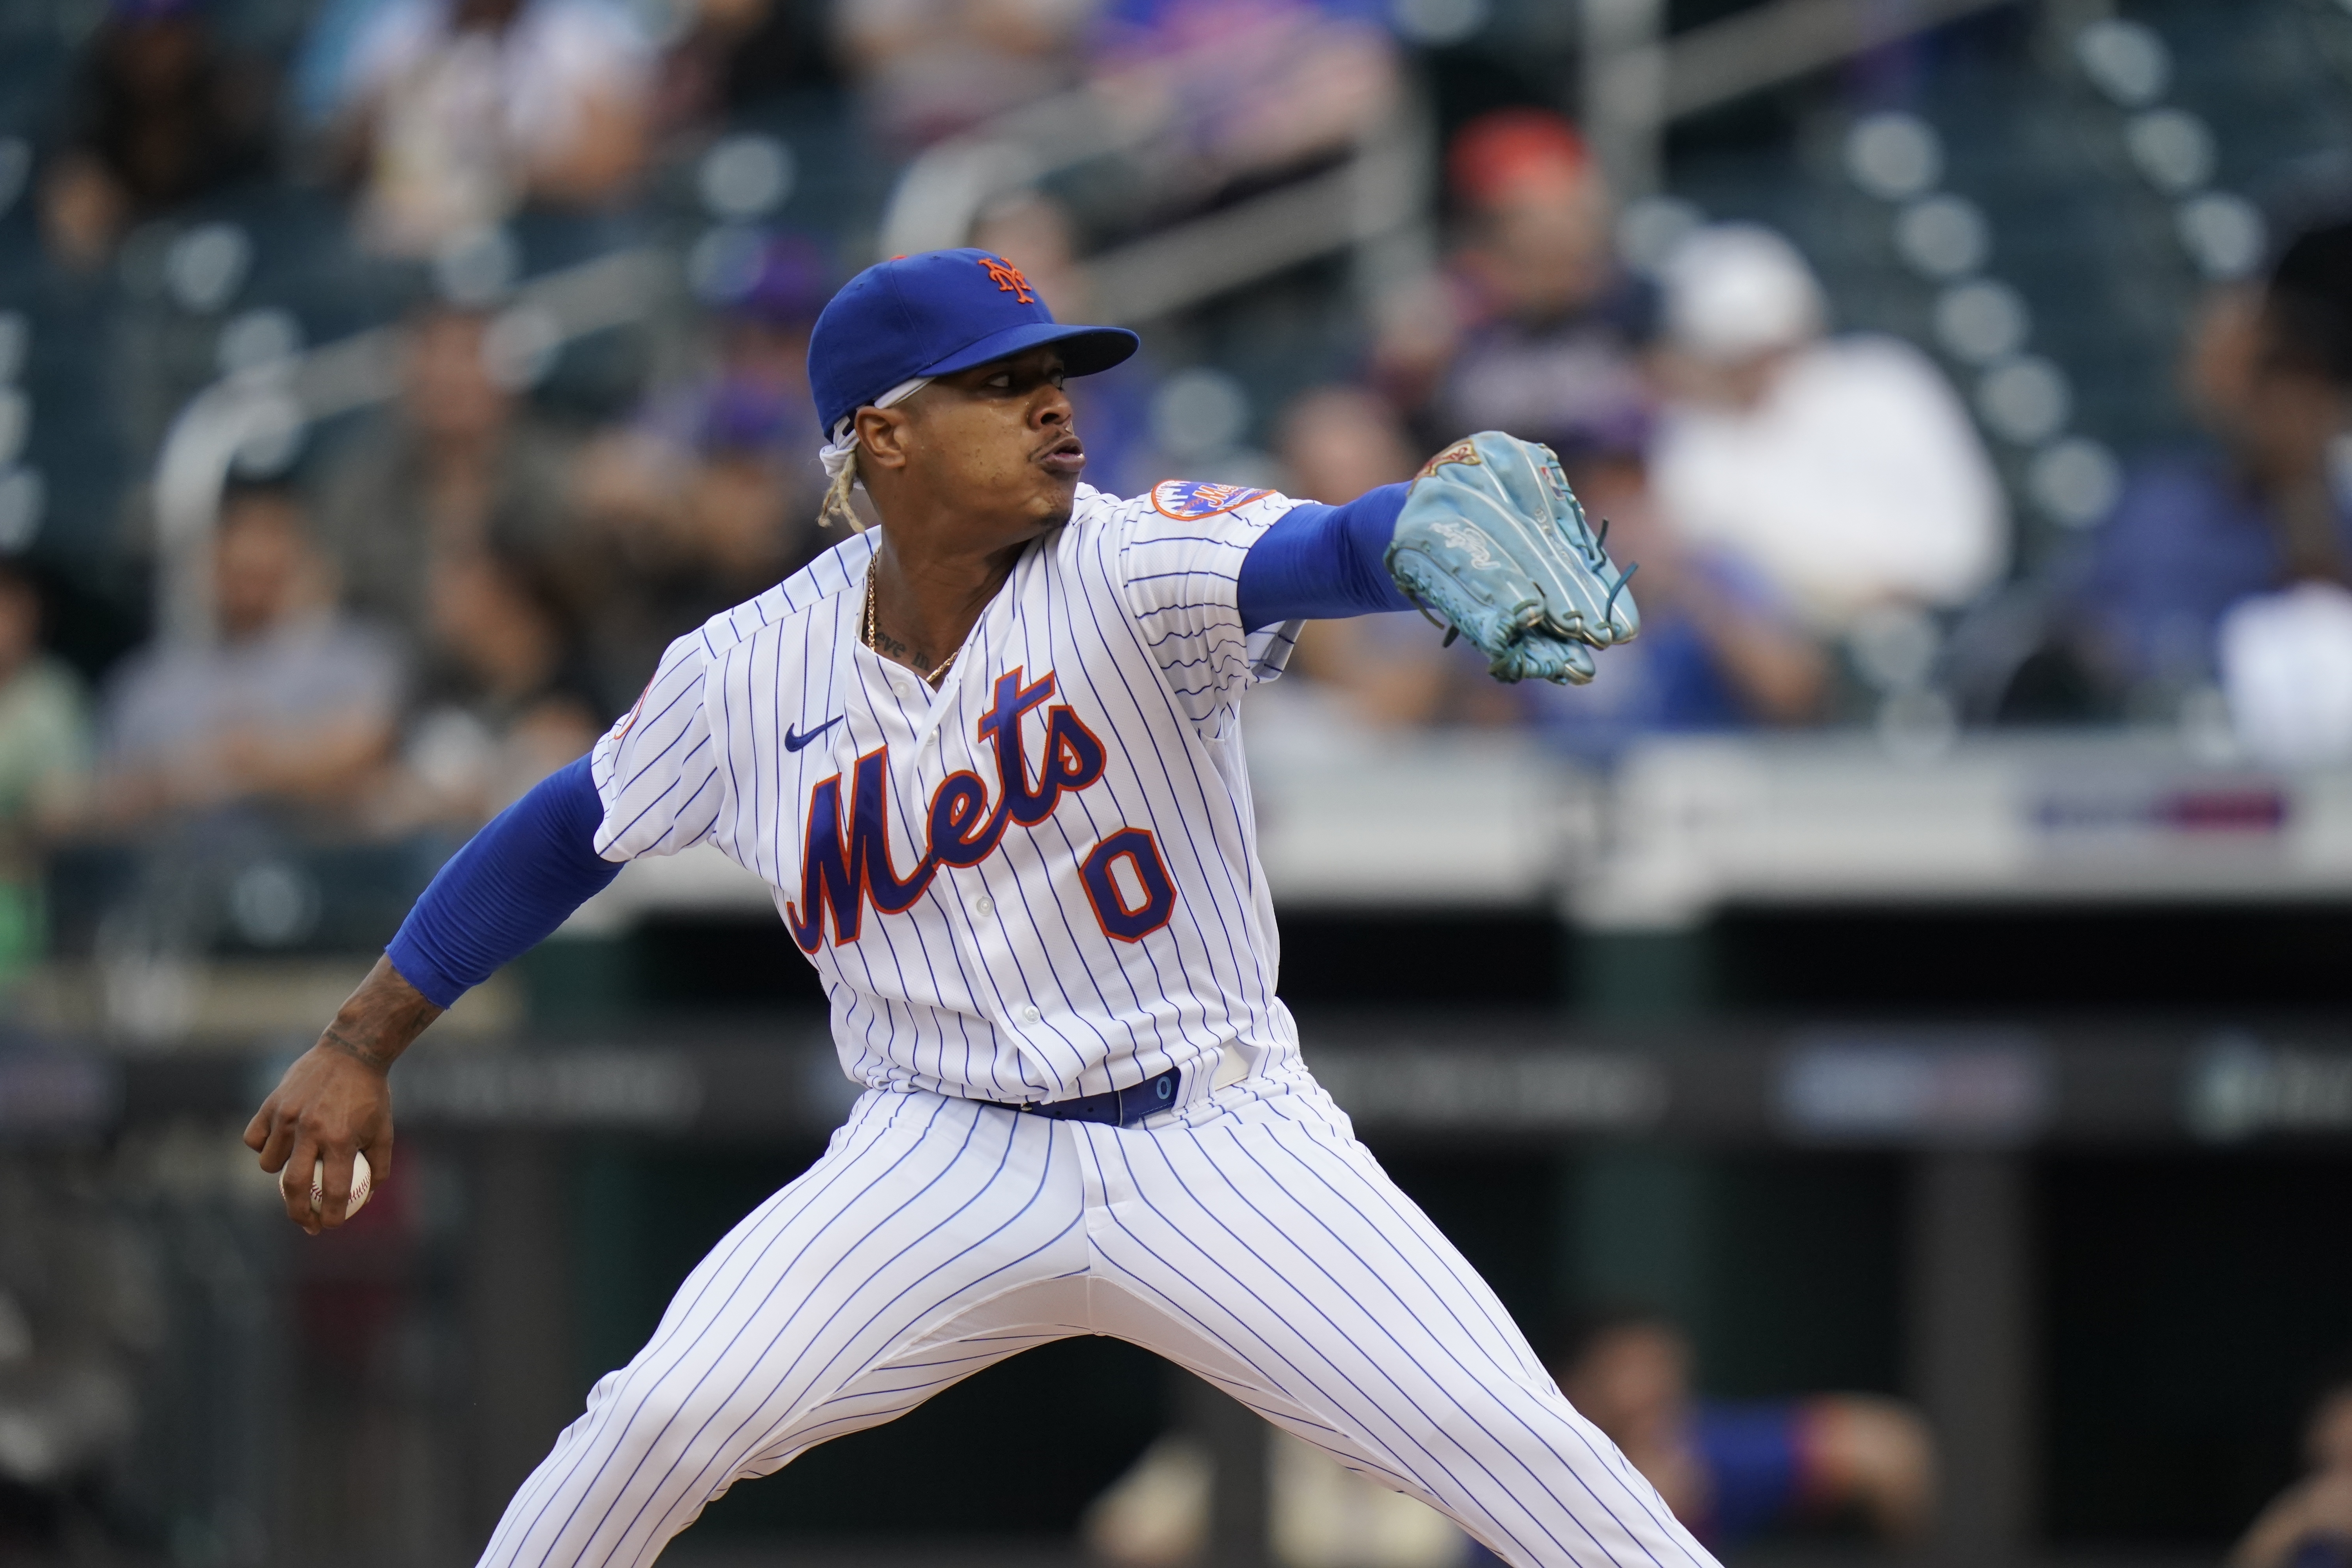 Mets All-Star pitcher Marcus Stroman opts out of 2020 MLB season